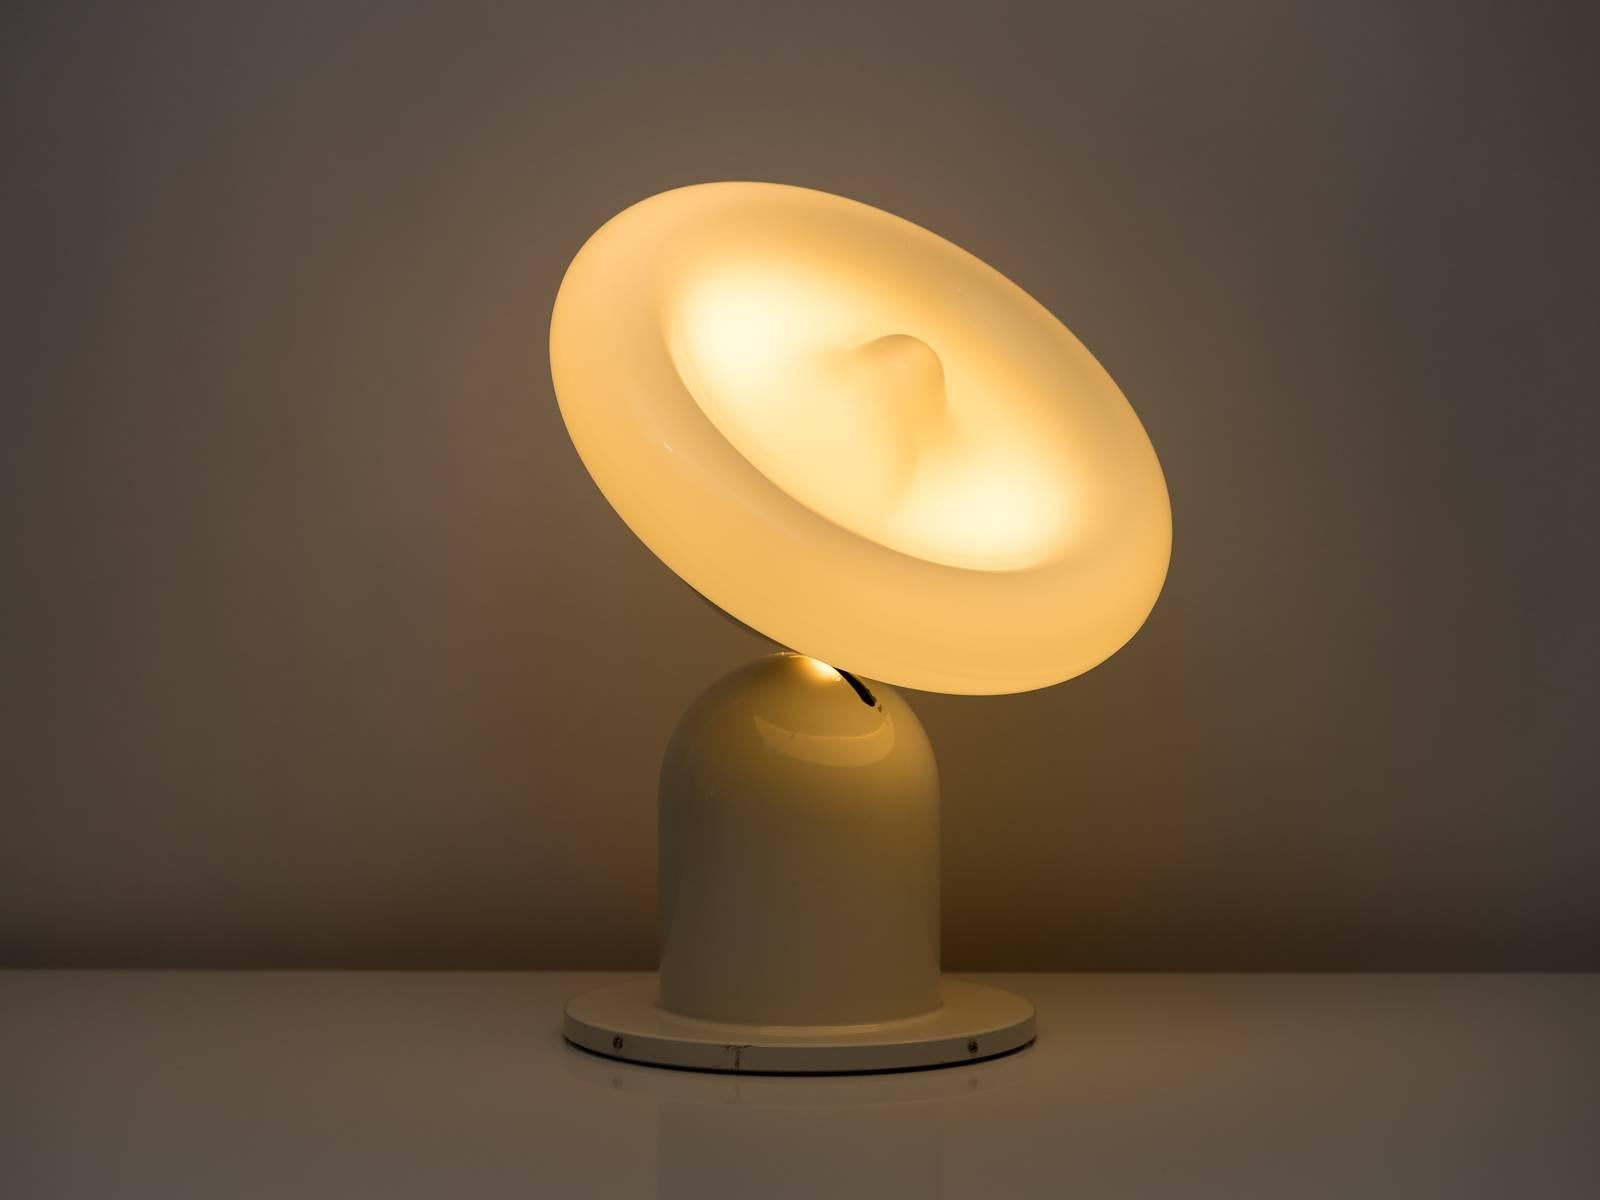 A unique and rare lamp designed by Studio Tetrarch for Lumenform with two points of articulation in the shade and base. Provides a beautiful glow that can positioned in a wide variety of configurations, giving meaning to its name of “Ciucca,” or